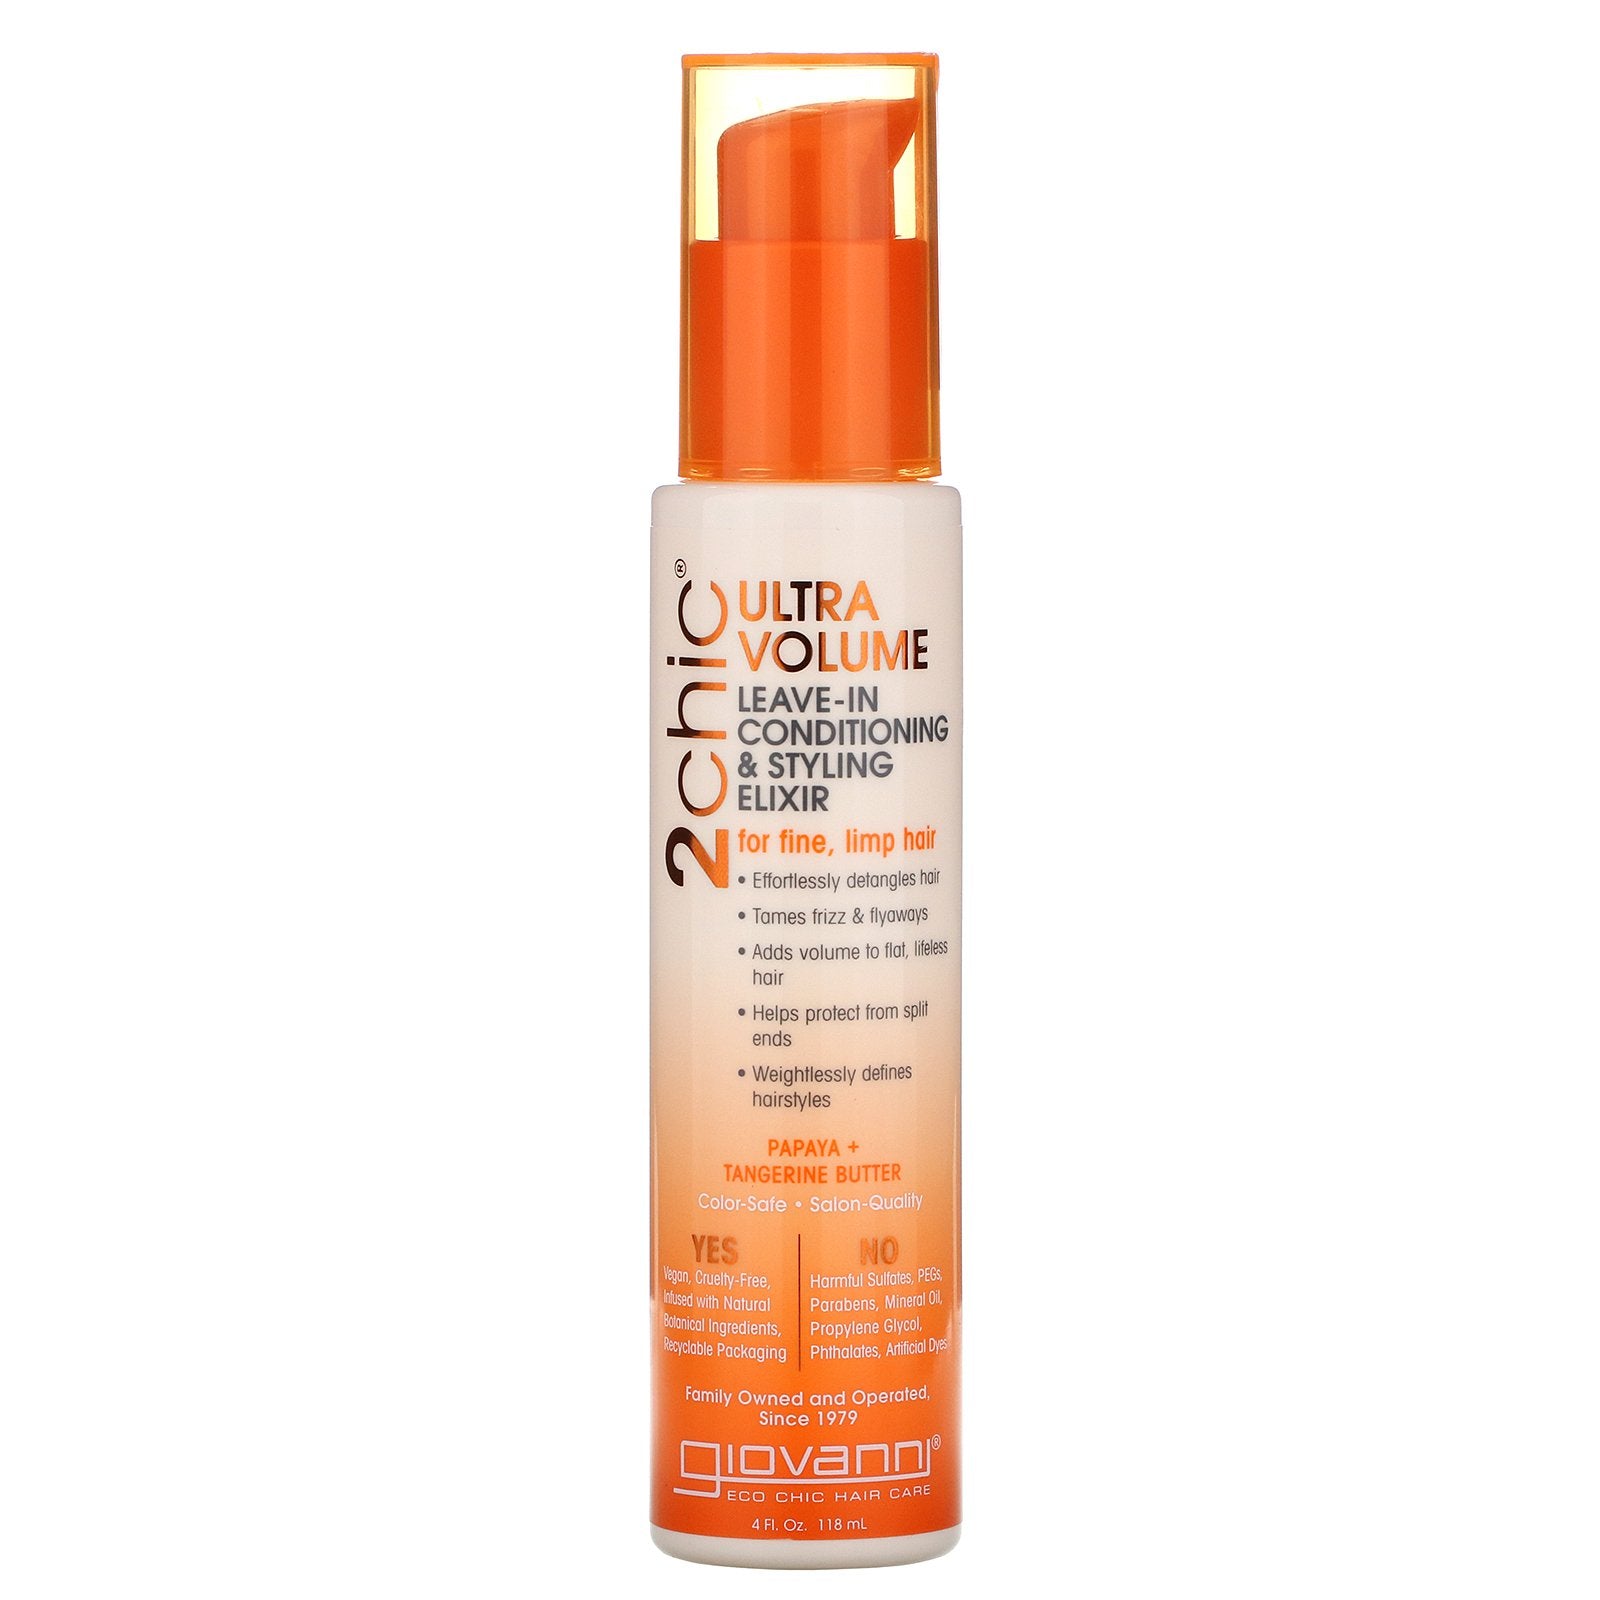 Giovanni, 2chic, Ultra-Volume Leave-In Conditioning Elixir, for Fine, Limp Hair, Tangerine & Papaya Butter, 4 fl oz (118 ml)